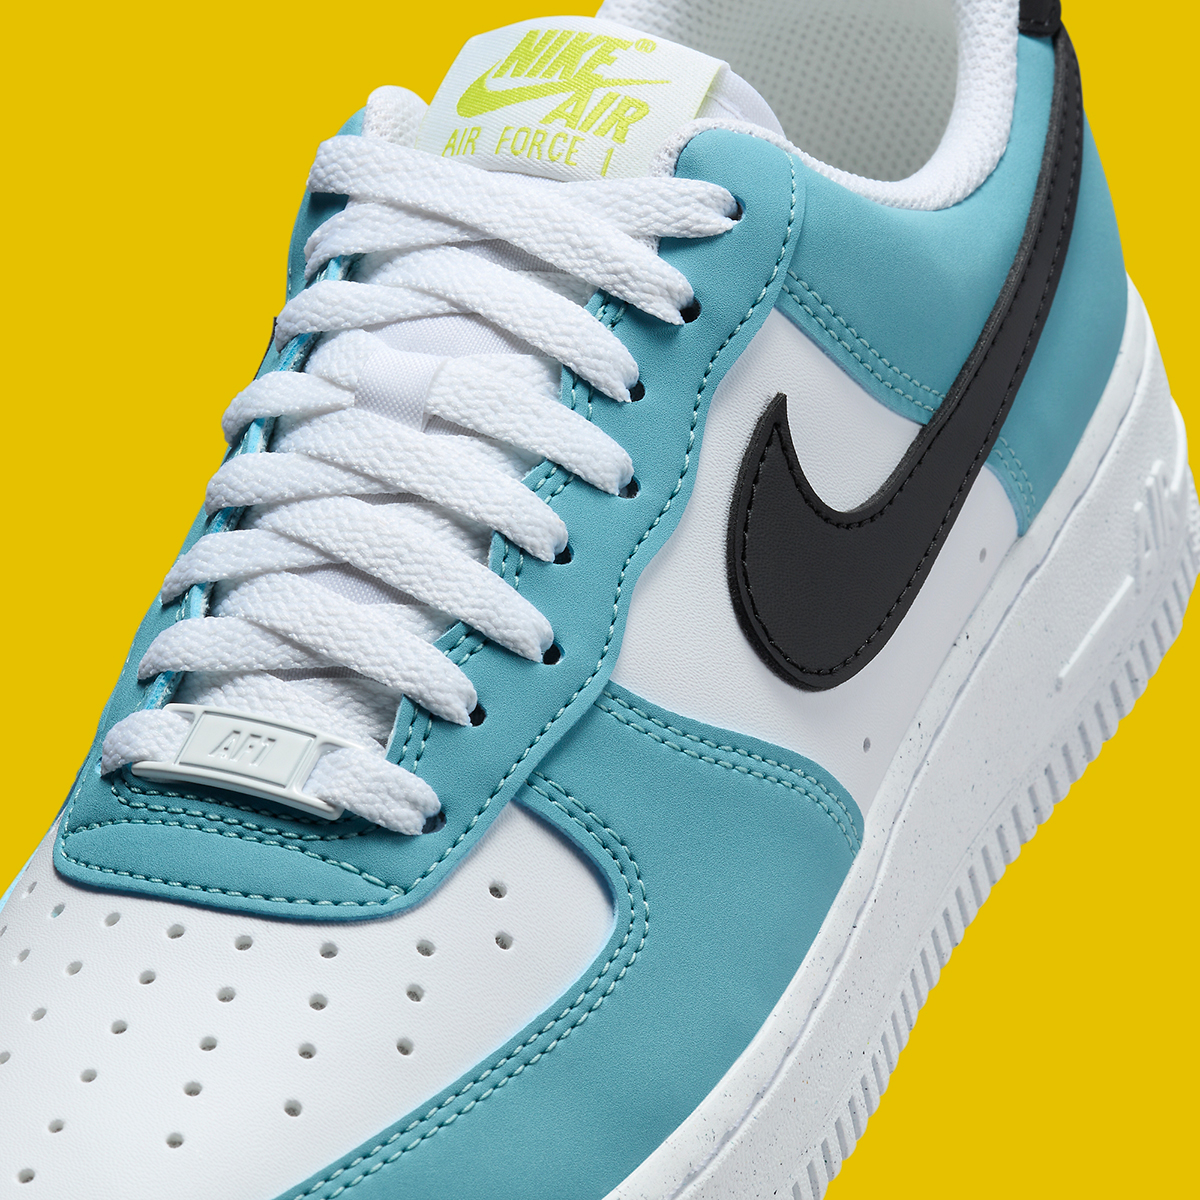 nike air force 1 low next nature white obsidian dusty cactus HJ9571 400 1